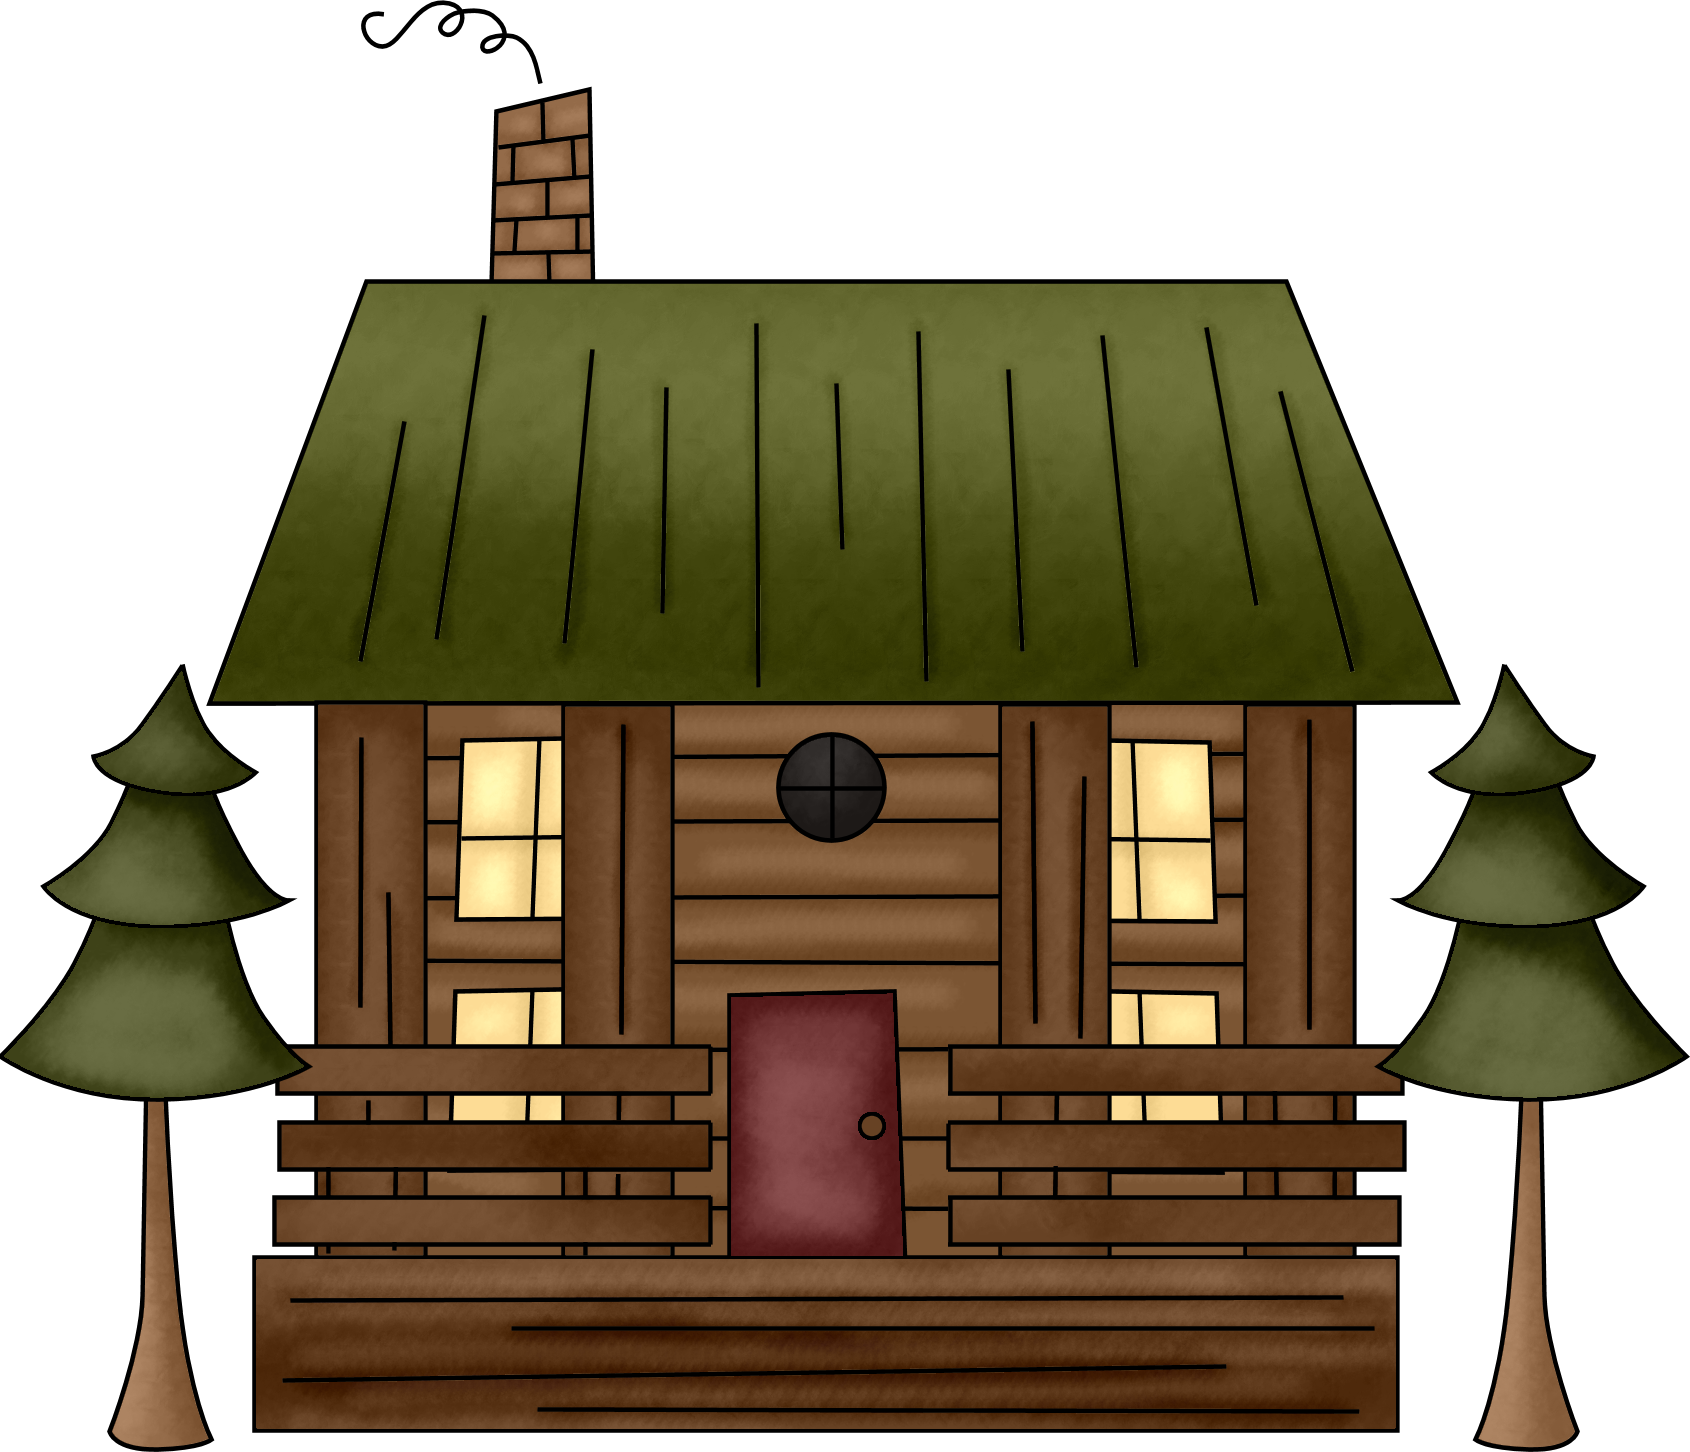 Old Cabin Clipart. Free log .